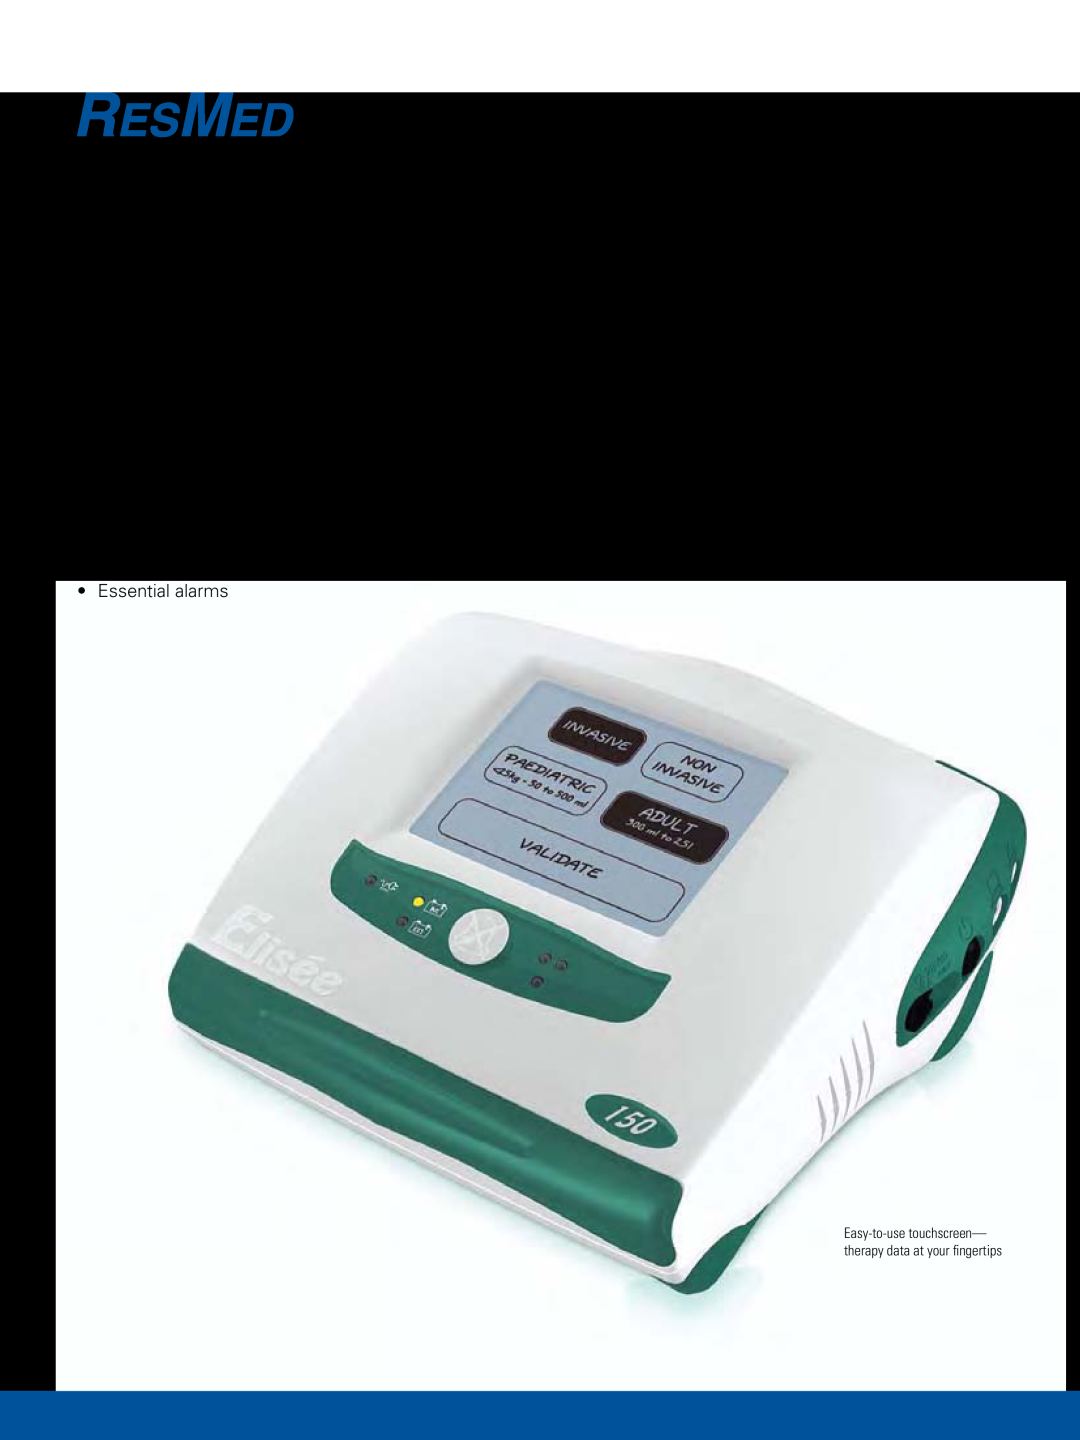 ResMed Elise 150 manual Elisée, Portable ventilation with rechargeable battery, Versatile therapy and two pre-setprograms 